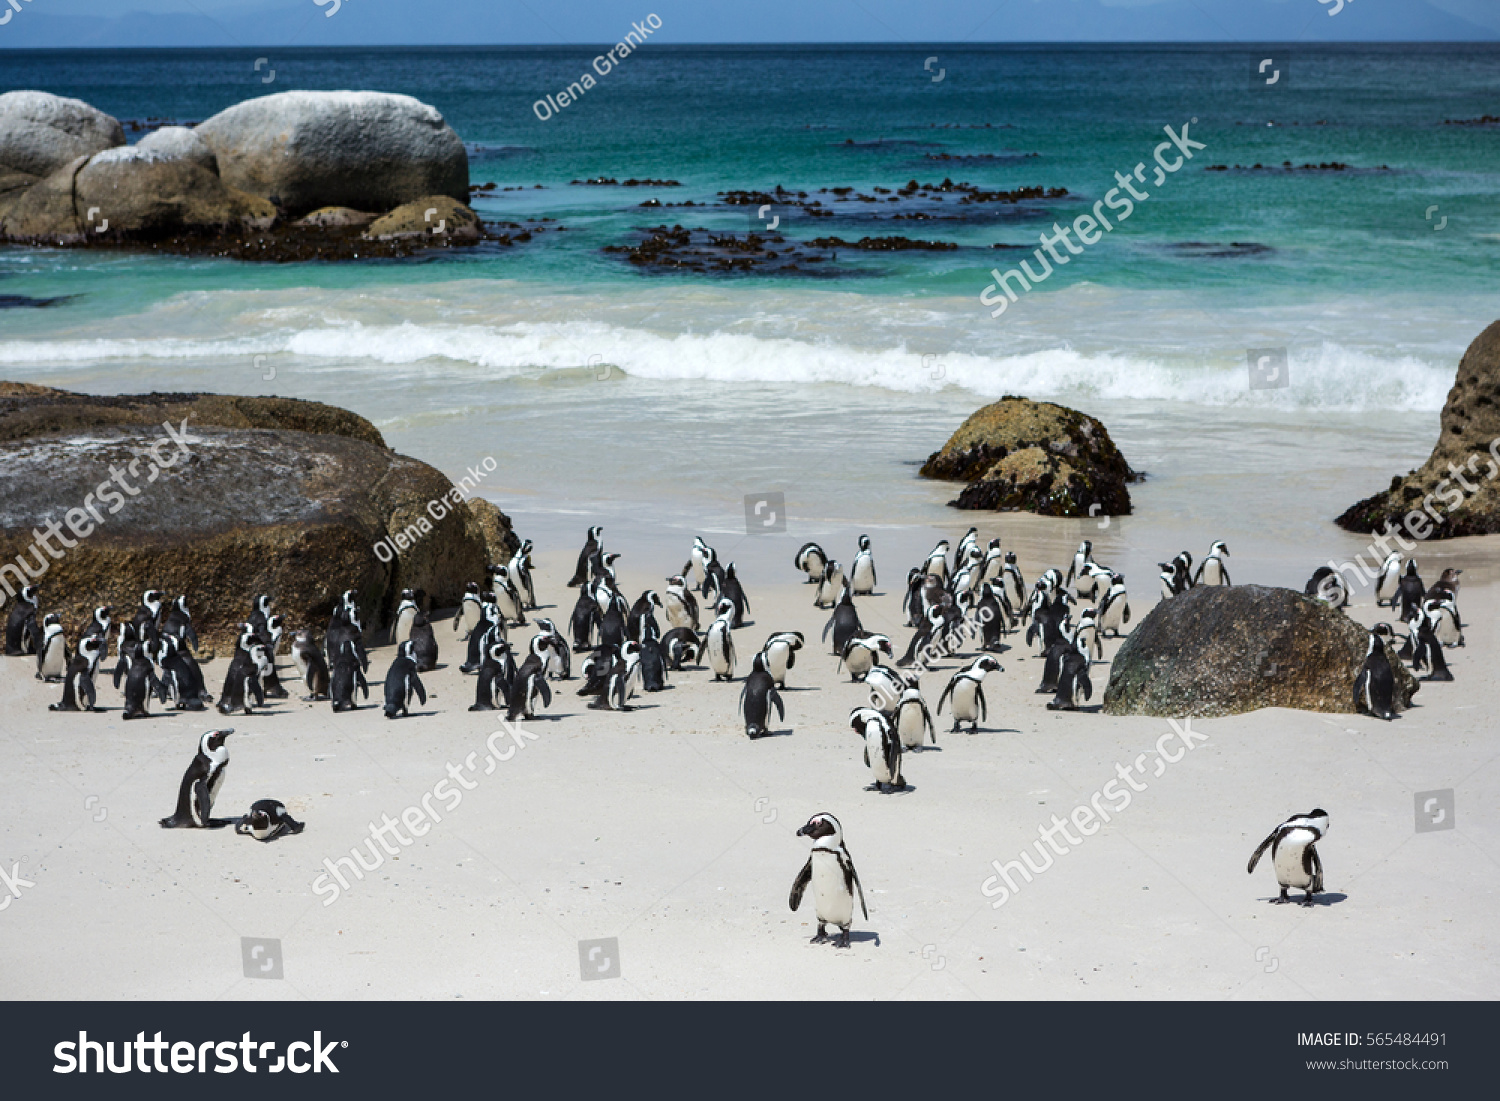 Penguins in the in the Boulders Beach Nature Reserve. Cape Town, South Africa #565484491